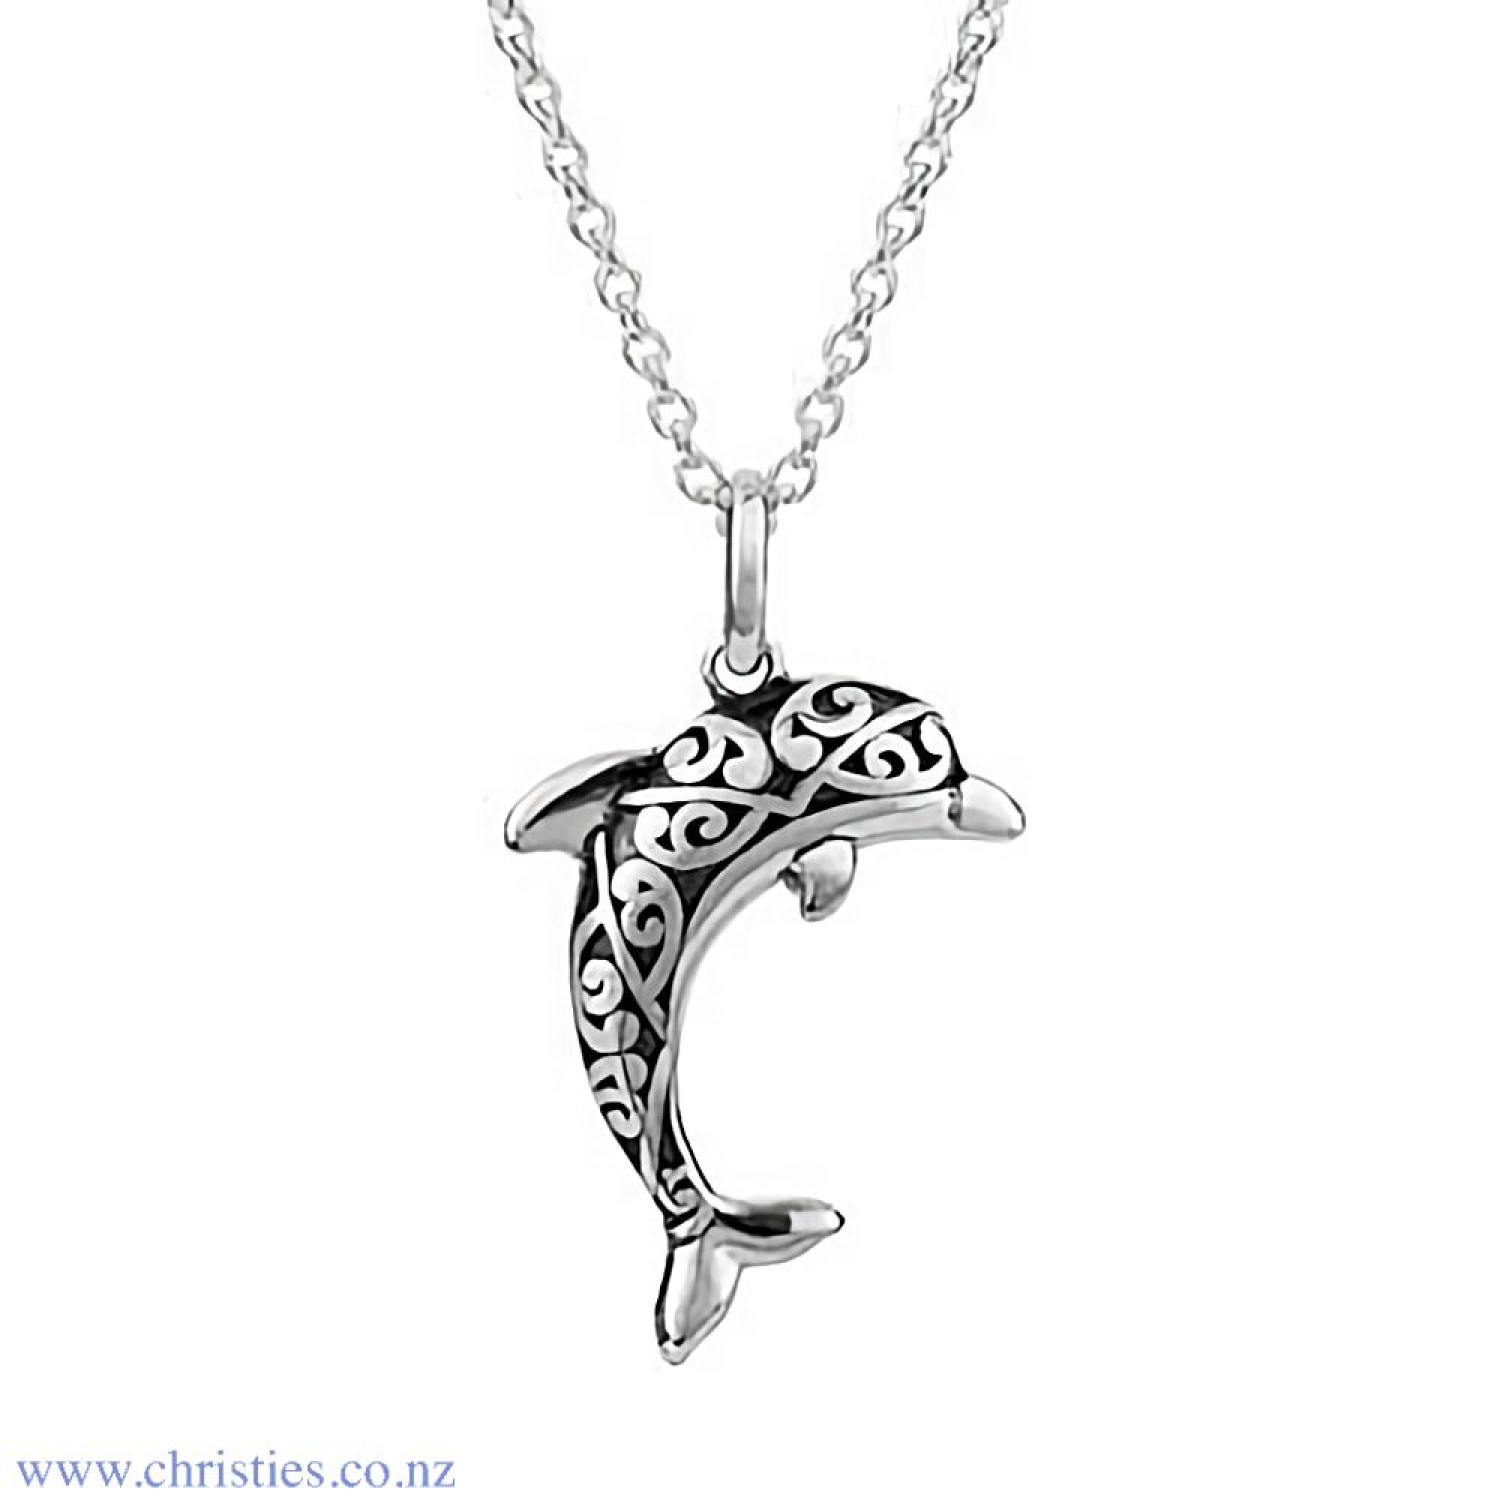 3P40006 Evolve Paciﬁc Dolphin Pendant. A symbol of companionship, the playful dolphin lives in large social groups and forms close bonds with others. The exquisite kowhaiwhai patterns etched deeply into the dolphin symbolise your family ties and those you